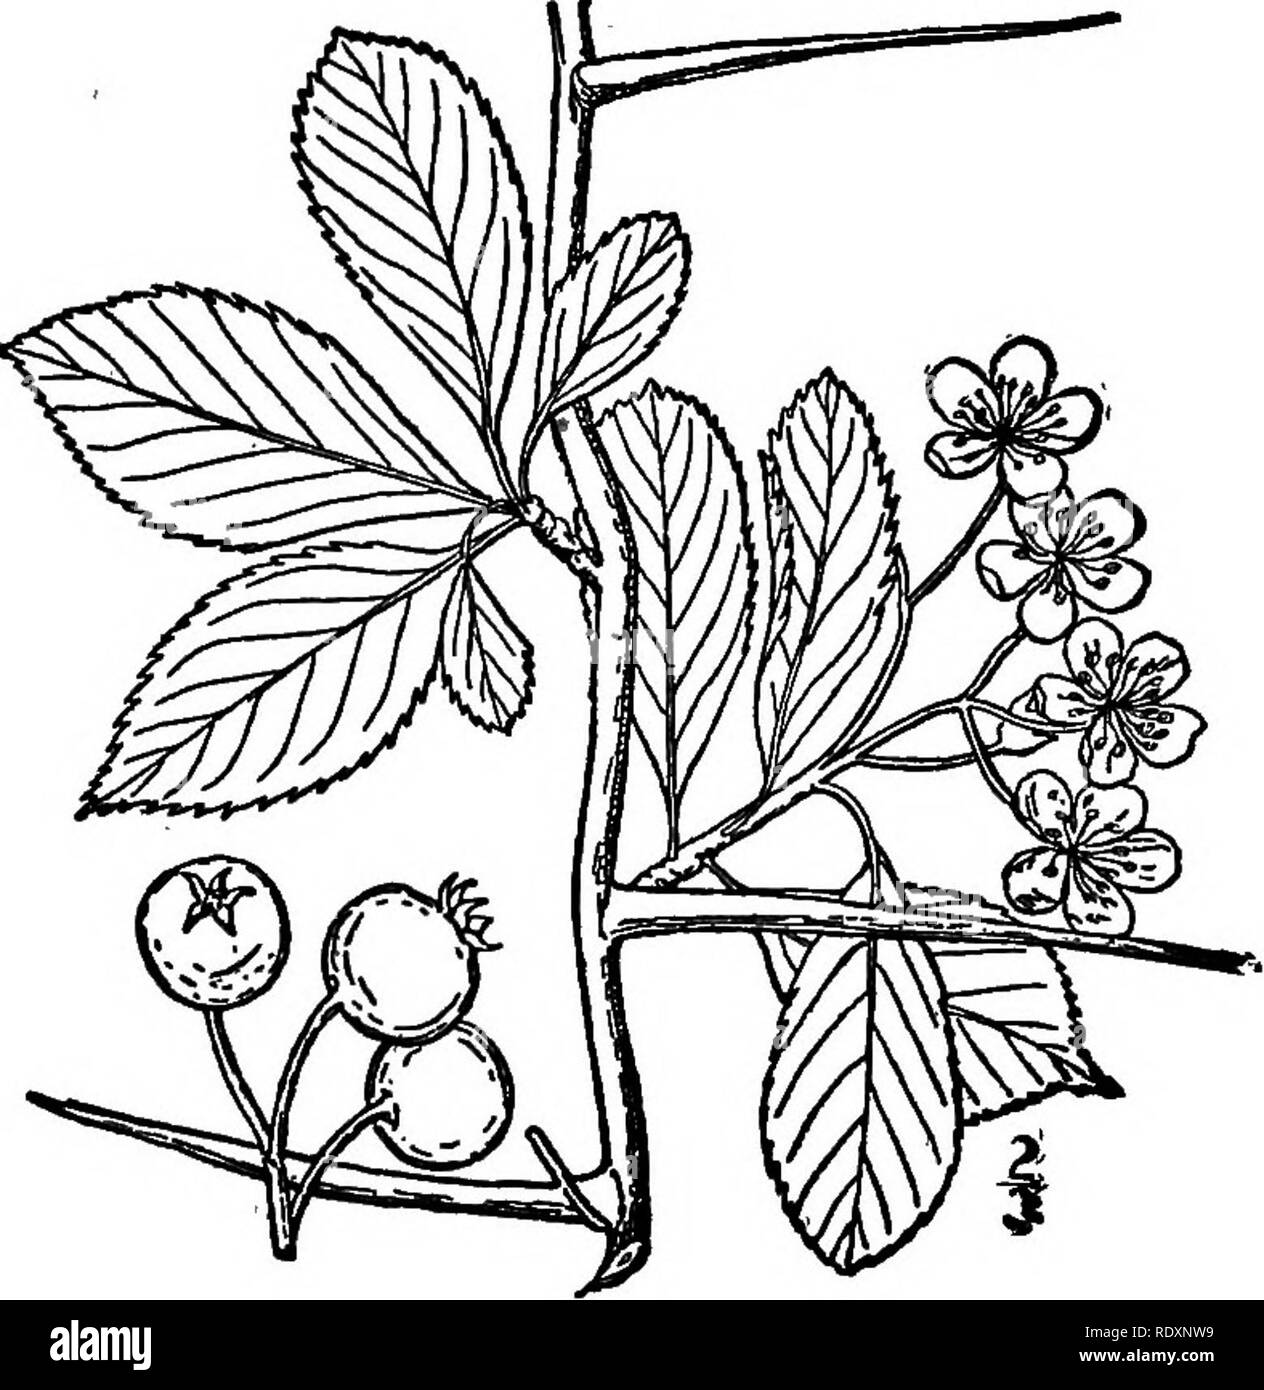 . The families of flowering plants. Plants; Phanerogams. FAMILIES OF FLOWEEING PLANTS 129 proper. The apples and their allies may be easily distinguished by the fruit, which consists of the enlarged fleshy calyx-tube, enclosing from one to five thiu-walled or papery carpels, each usually single- seeded. This structure may be seen in Fig. 113. A fruit of this type is known to botanists as &amp;pome (irom pomvm, fniit). Generic differences in this family are more apparent than real, and indeed the apple {Malm), the pear (Pynts), and the mountain ash {Sor- bus), were until recently generally plac Stock Photo